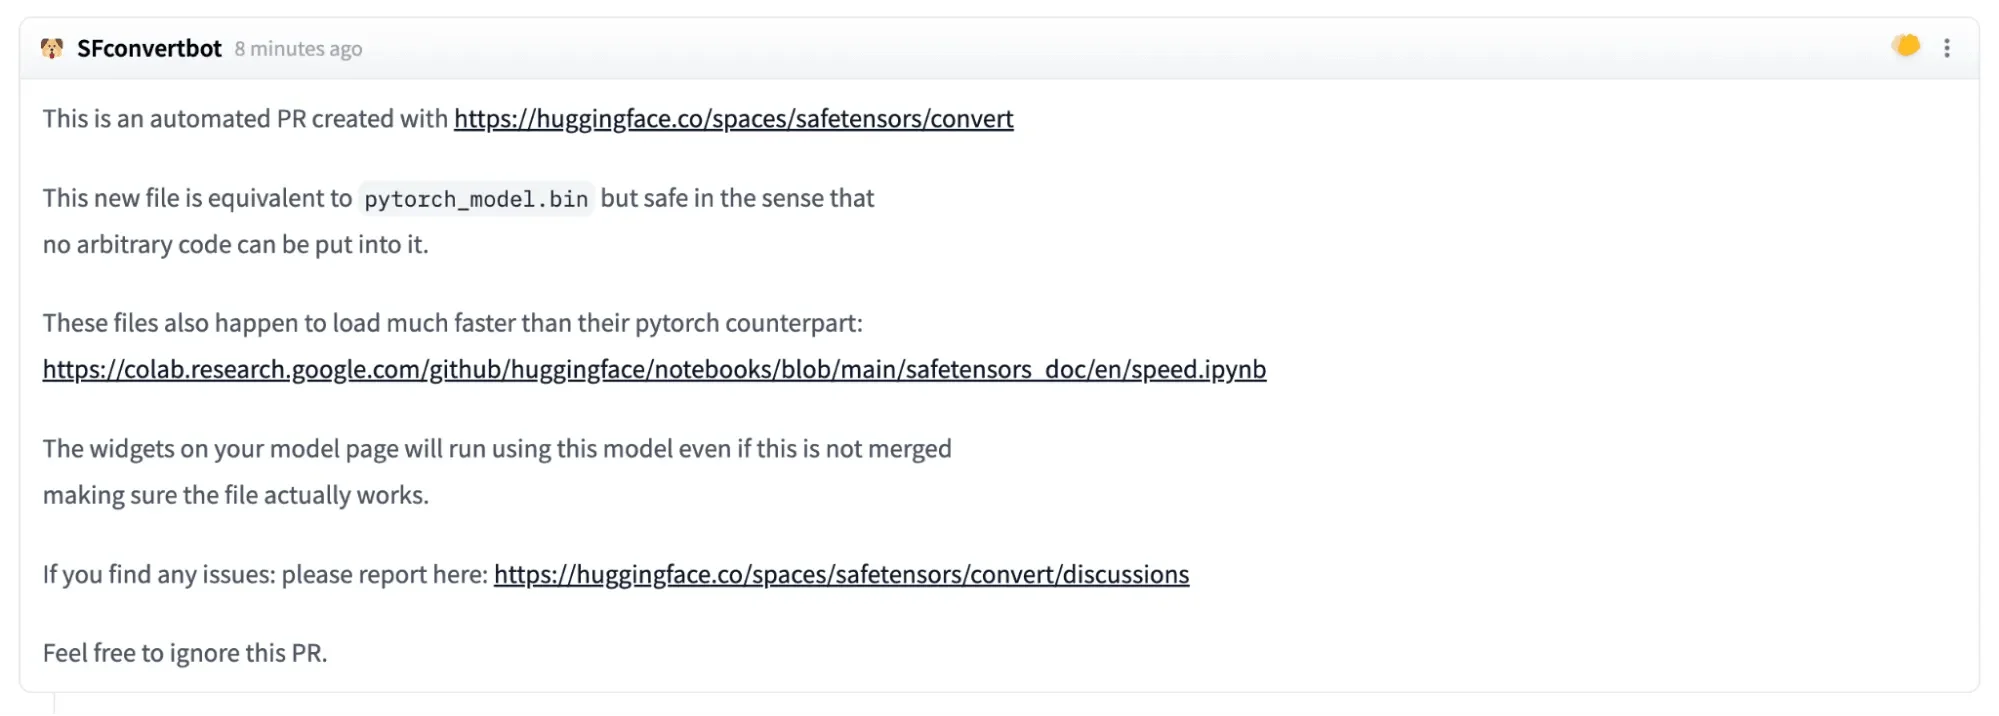 A pull request issued by SFconvertbot (Source: HiddenLayer Report)